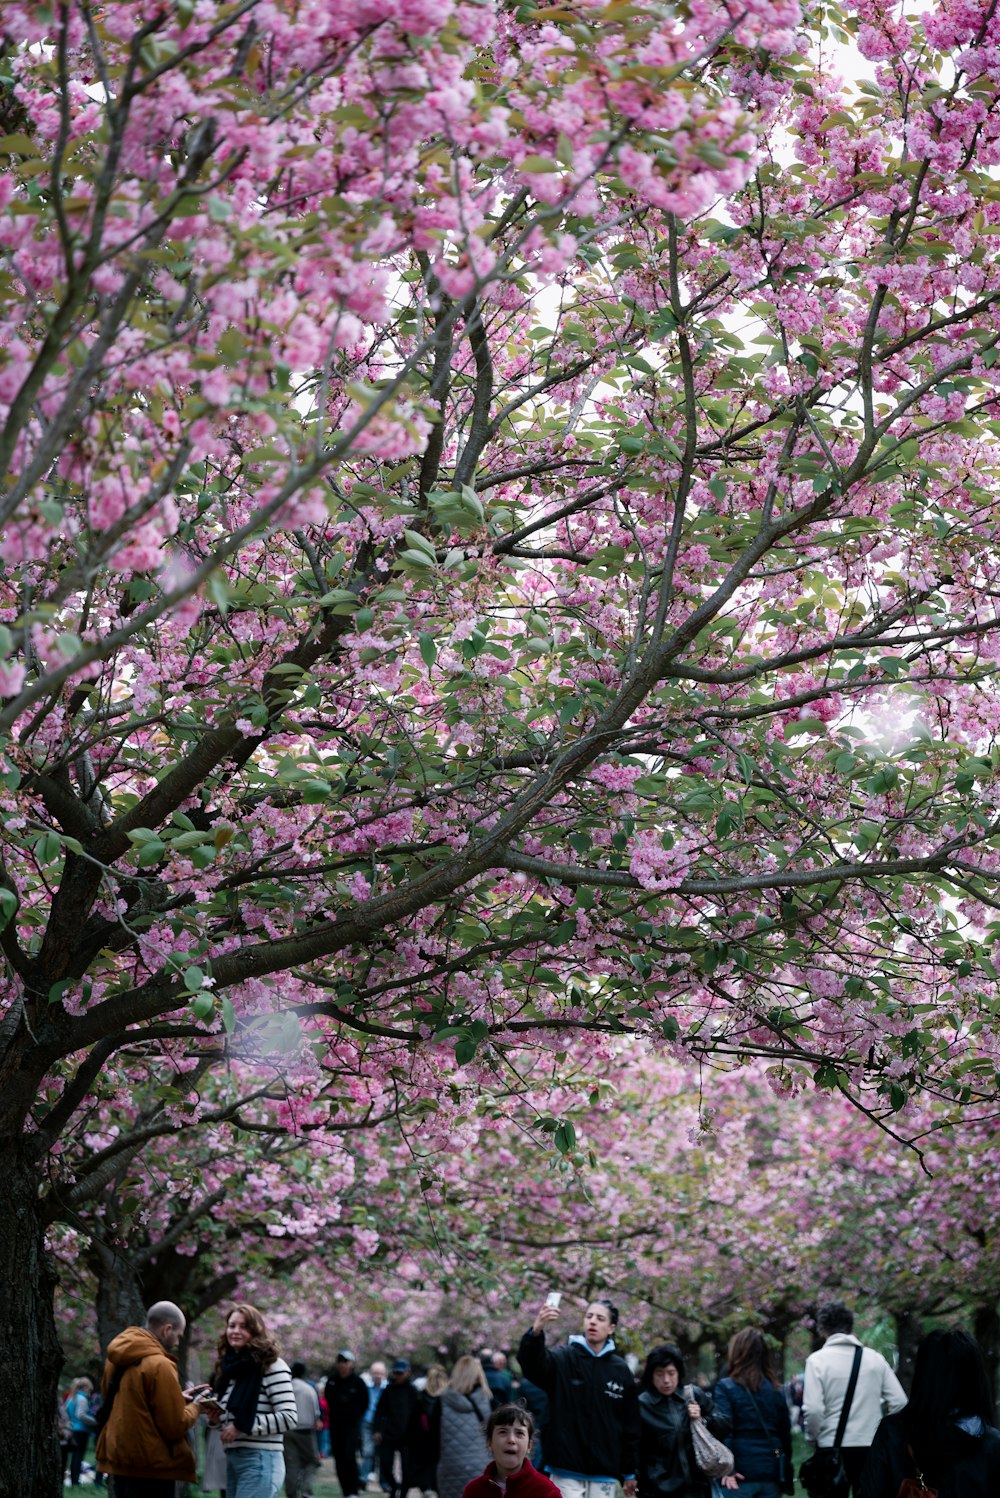 a group of people standing under a tree filled with pink flowers